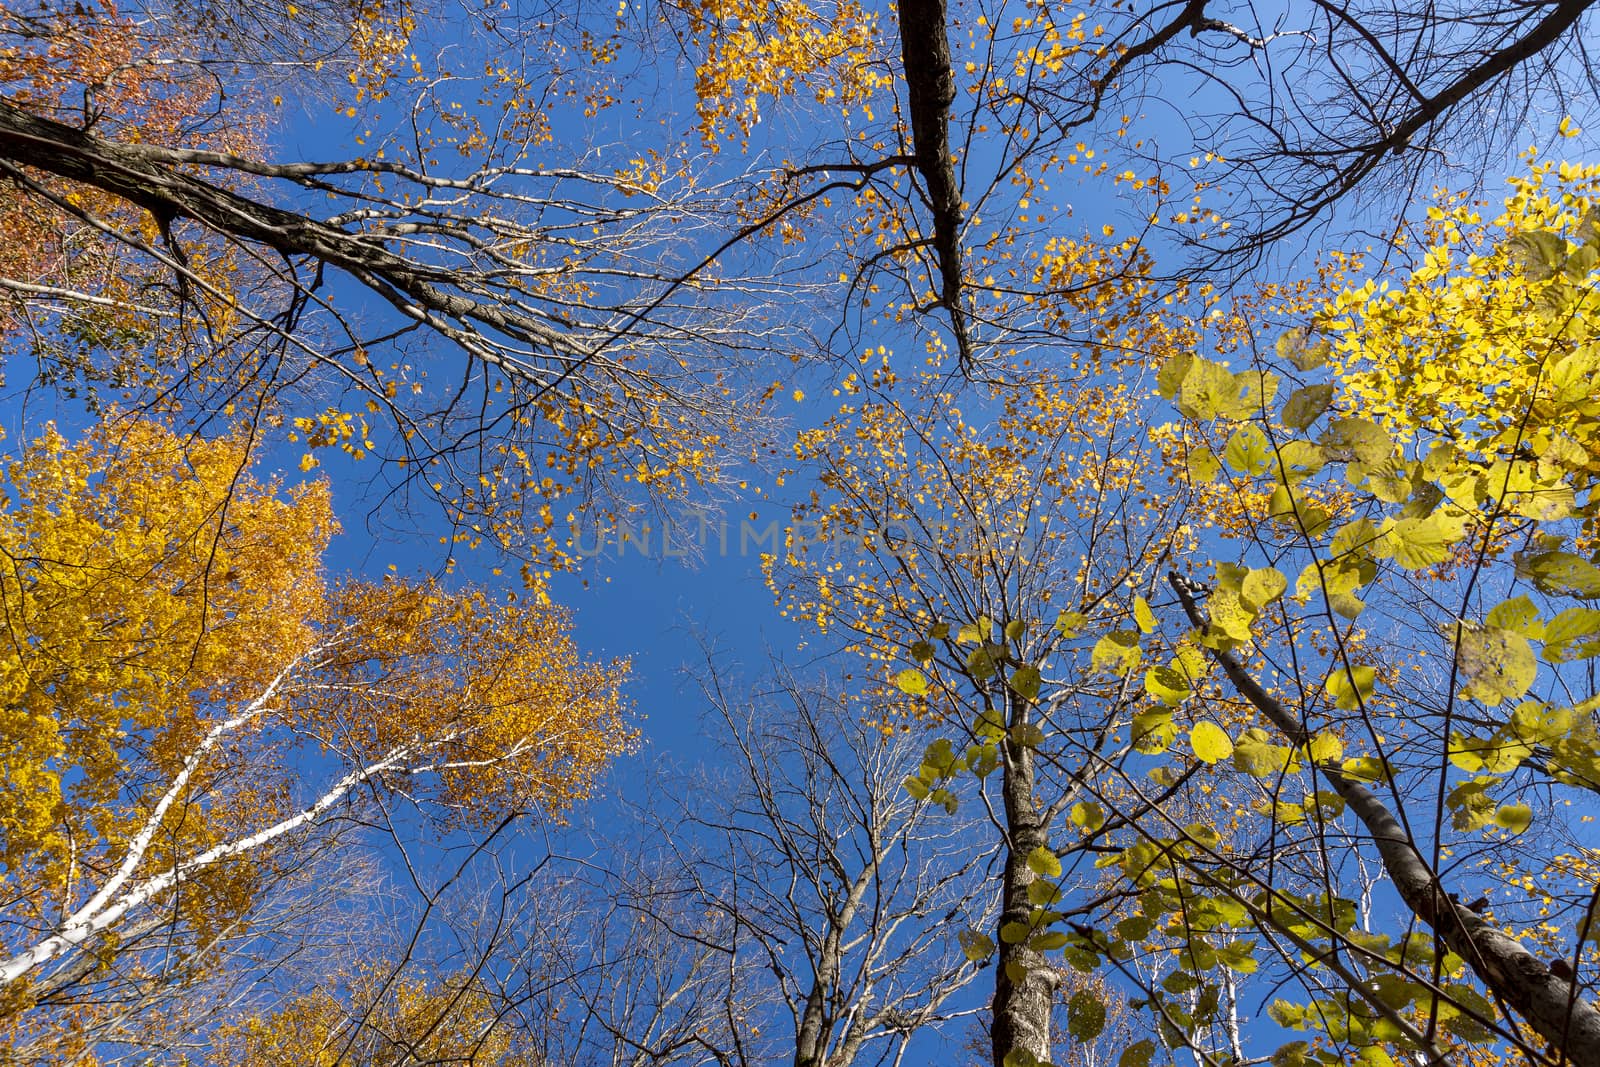 Treetops with orange and yellow leaves against a blue sky by ben44